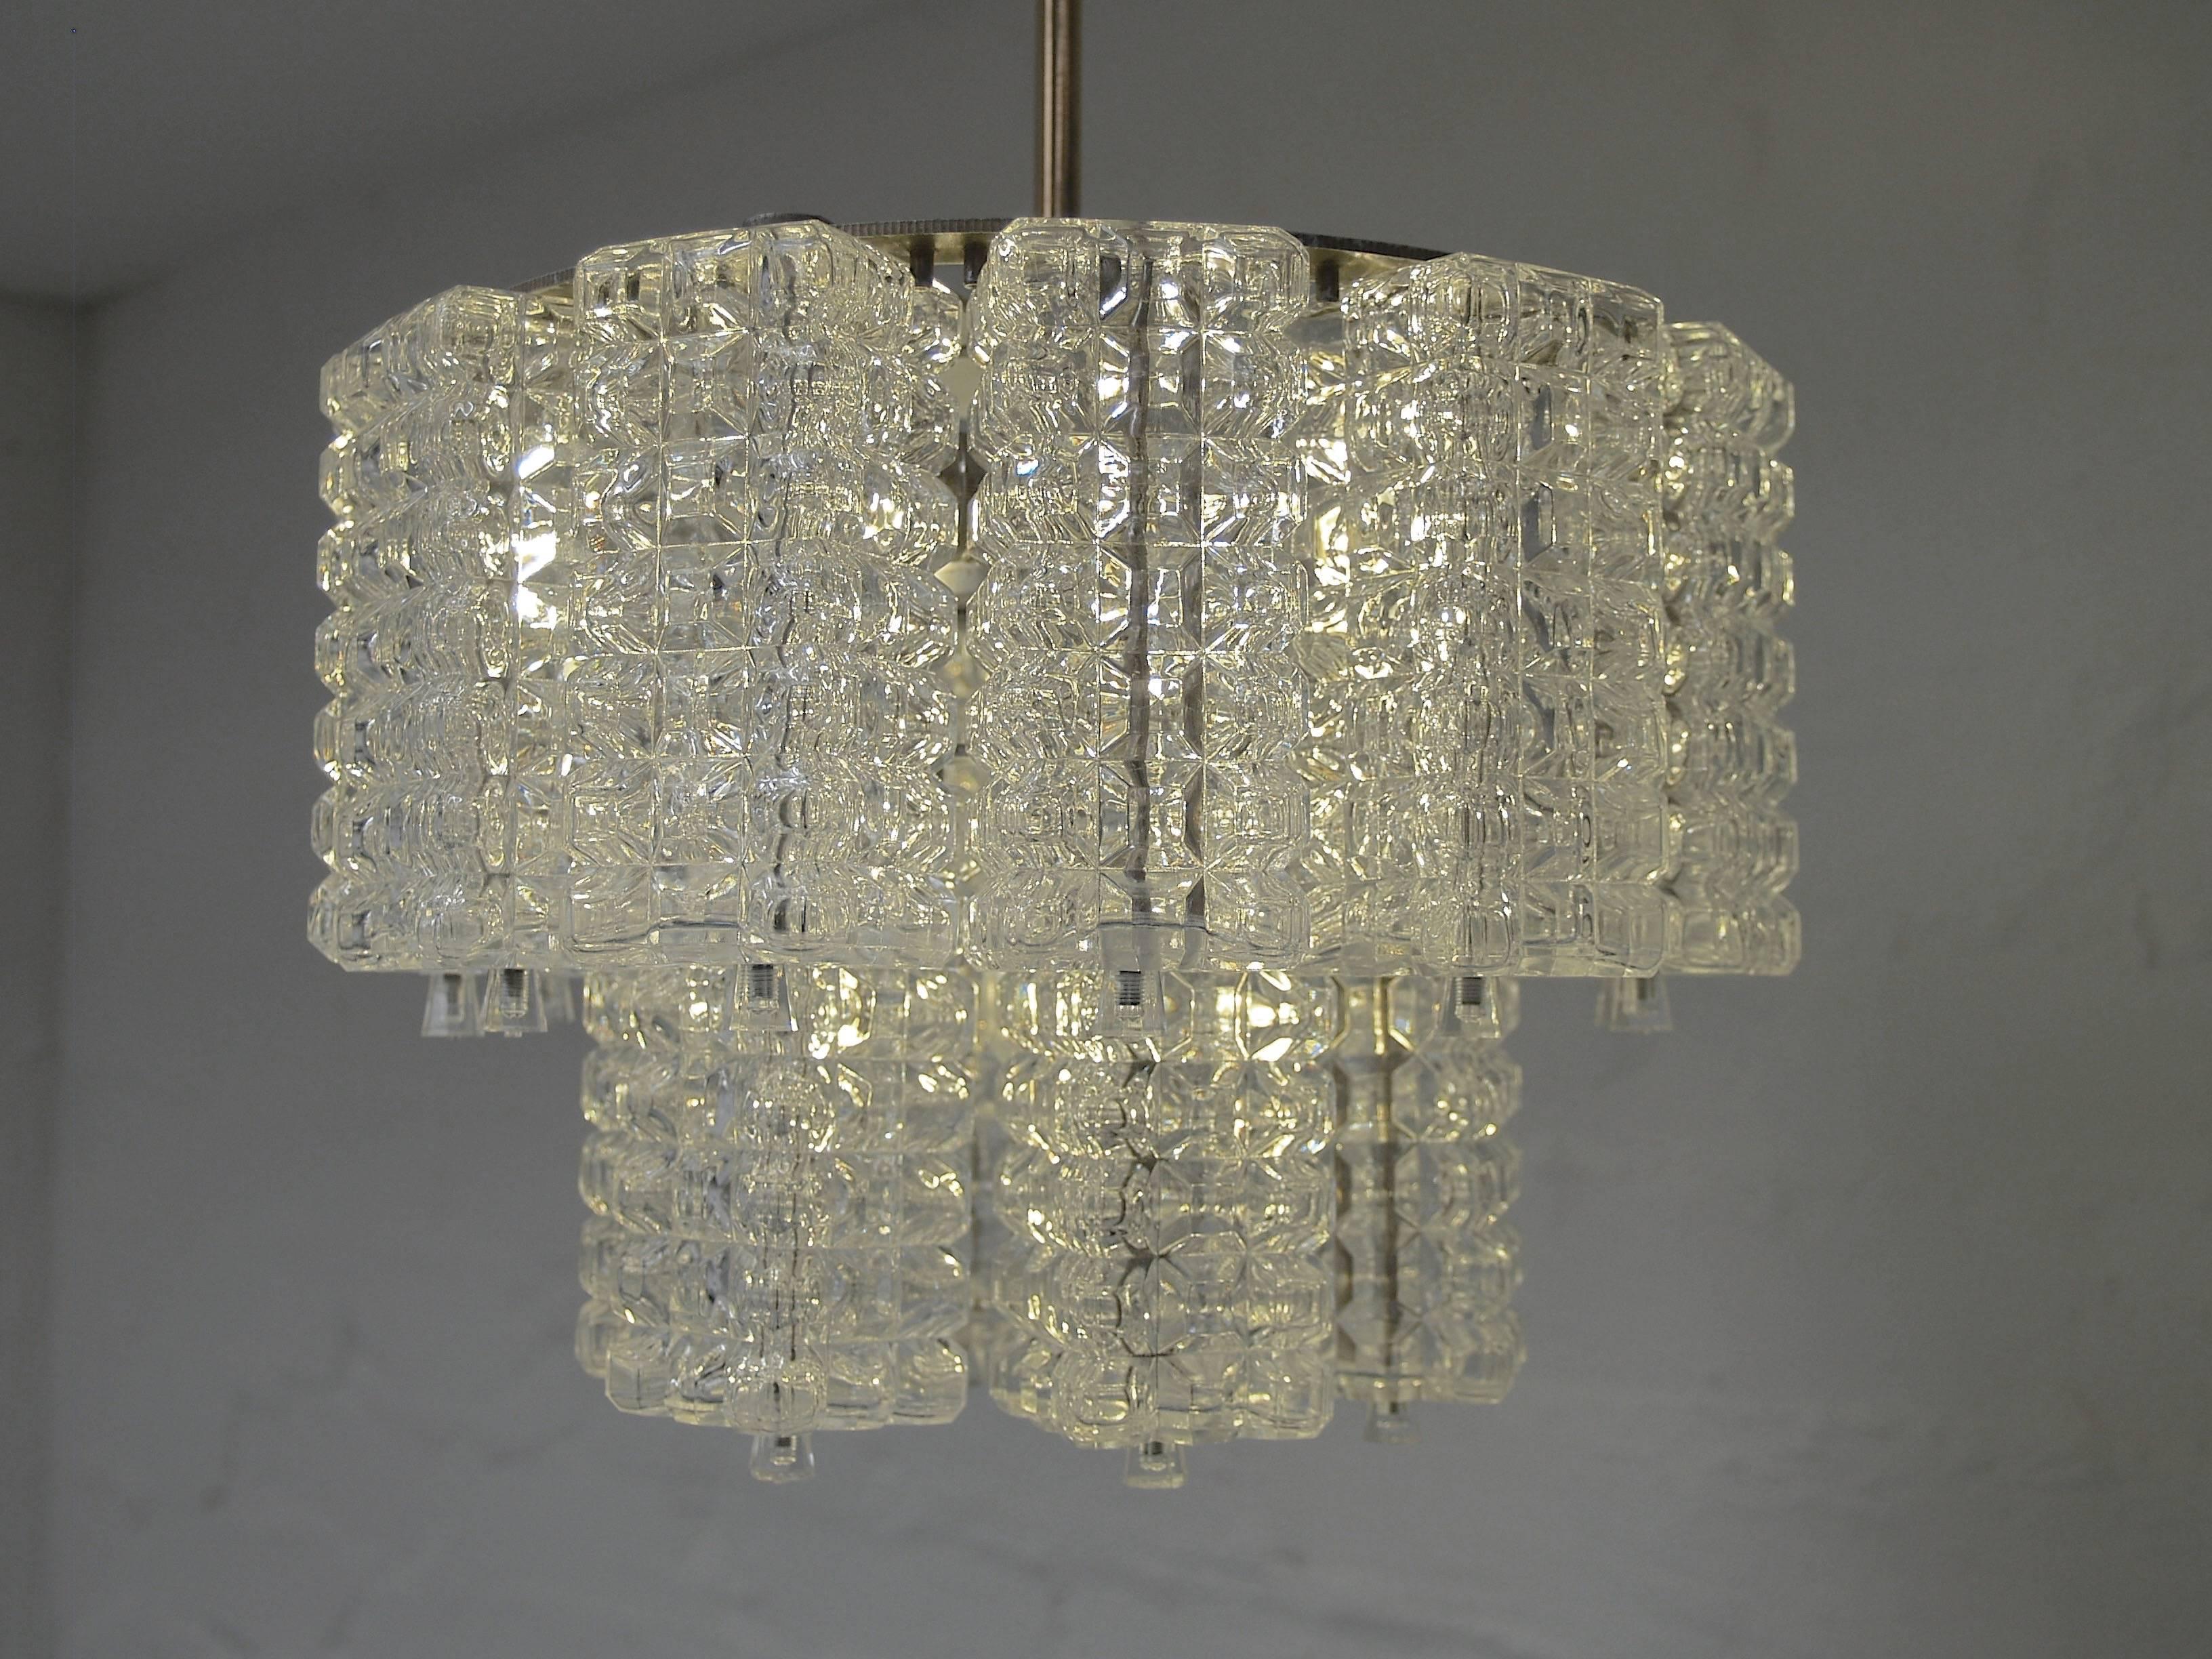 Cast Pair of Crystal Chandeliers by Austrolux of Austria circa 1960